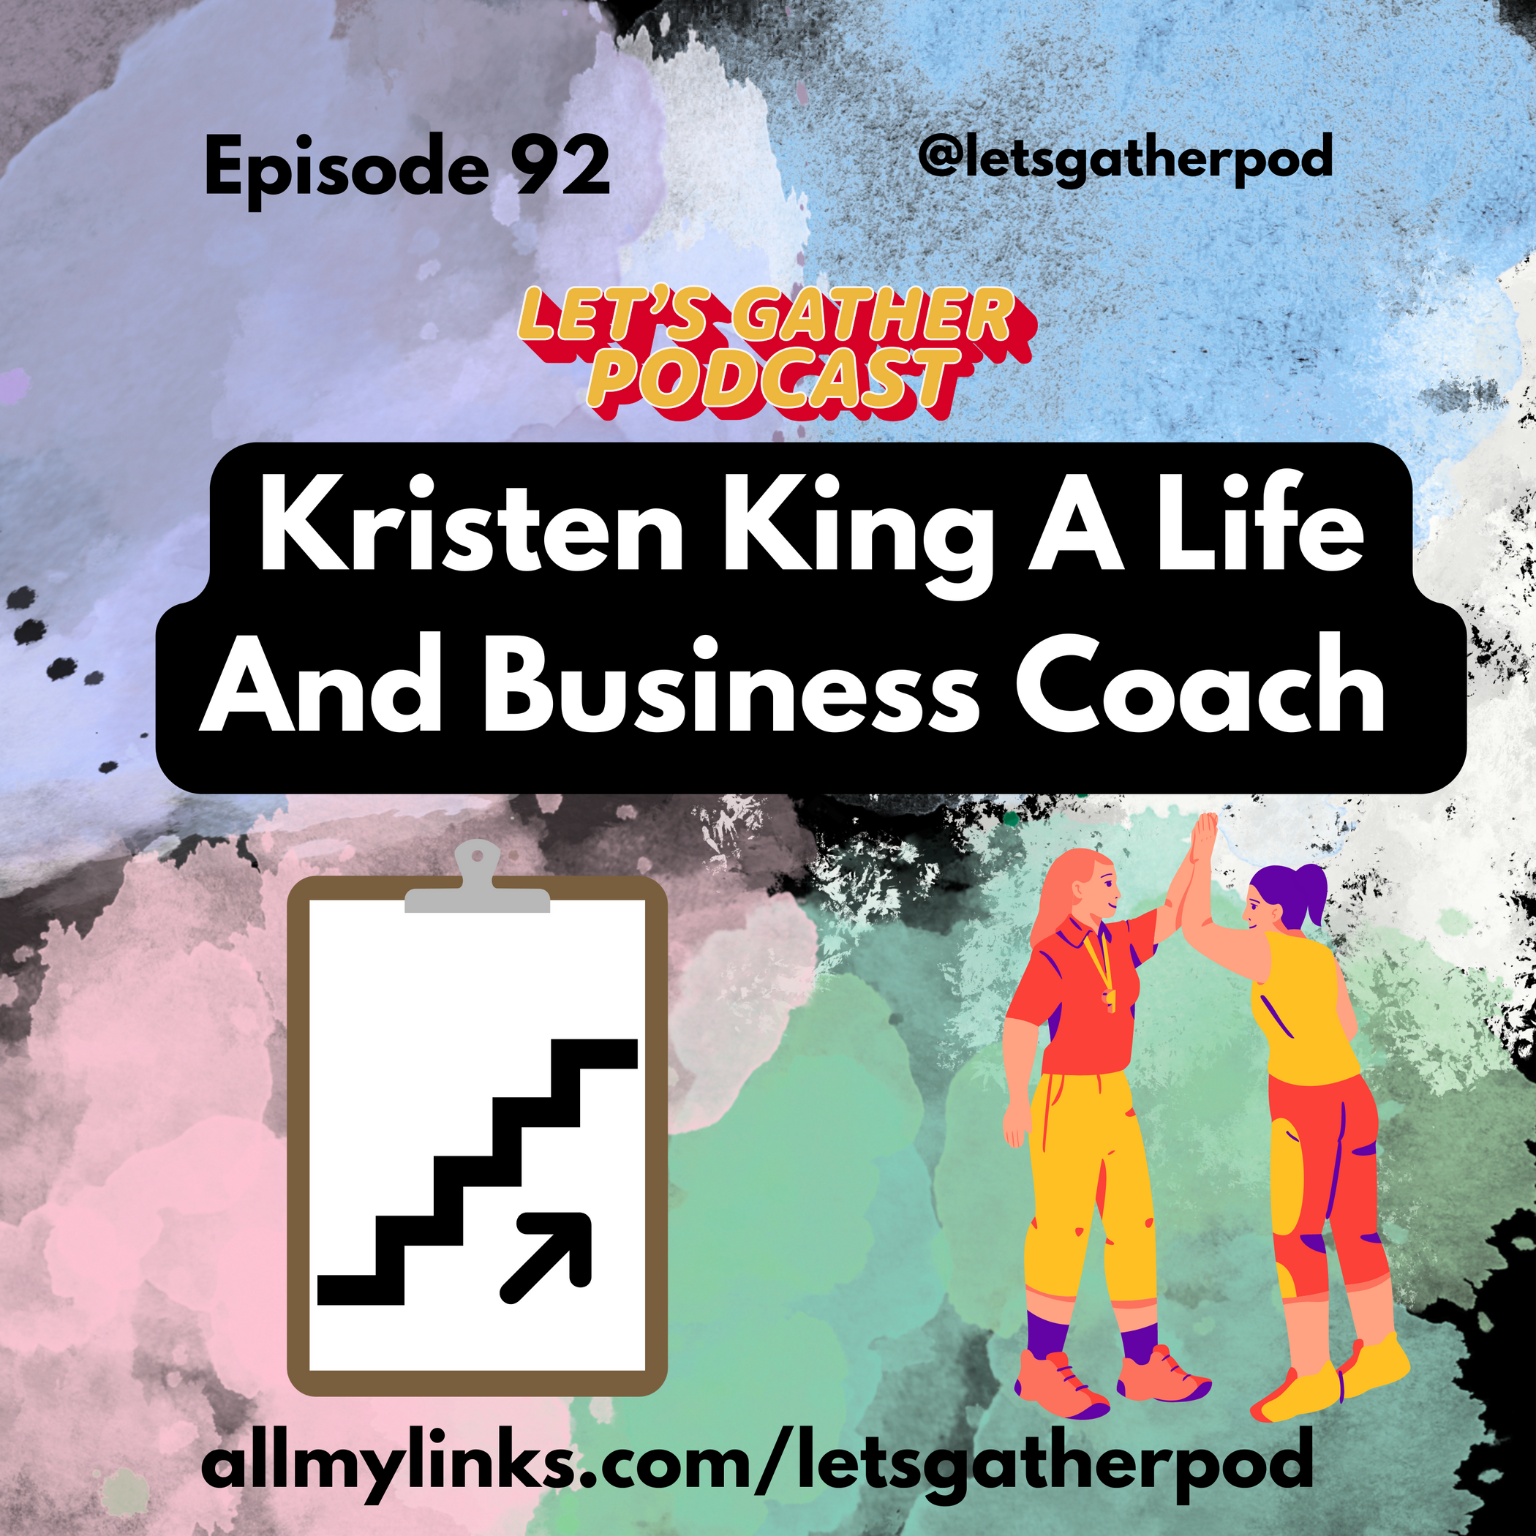 New Interview: Let’s Gather Podcast by Zeke Williams in Kristen King – A Life And Business Coach